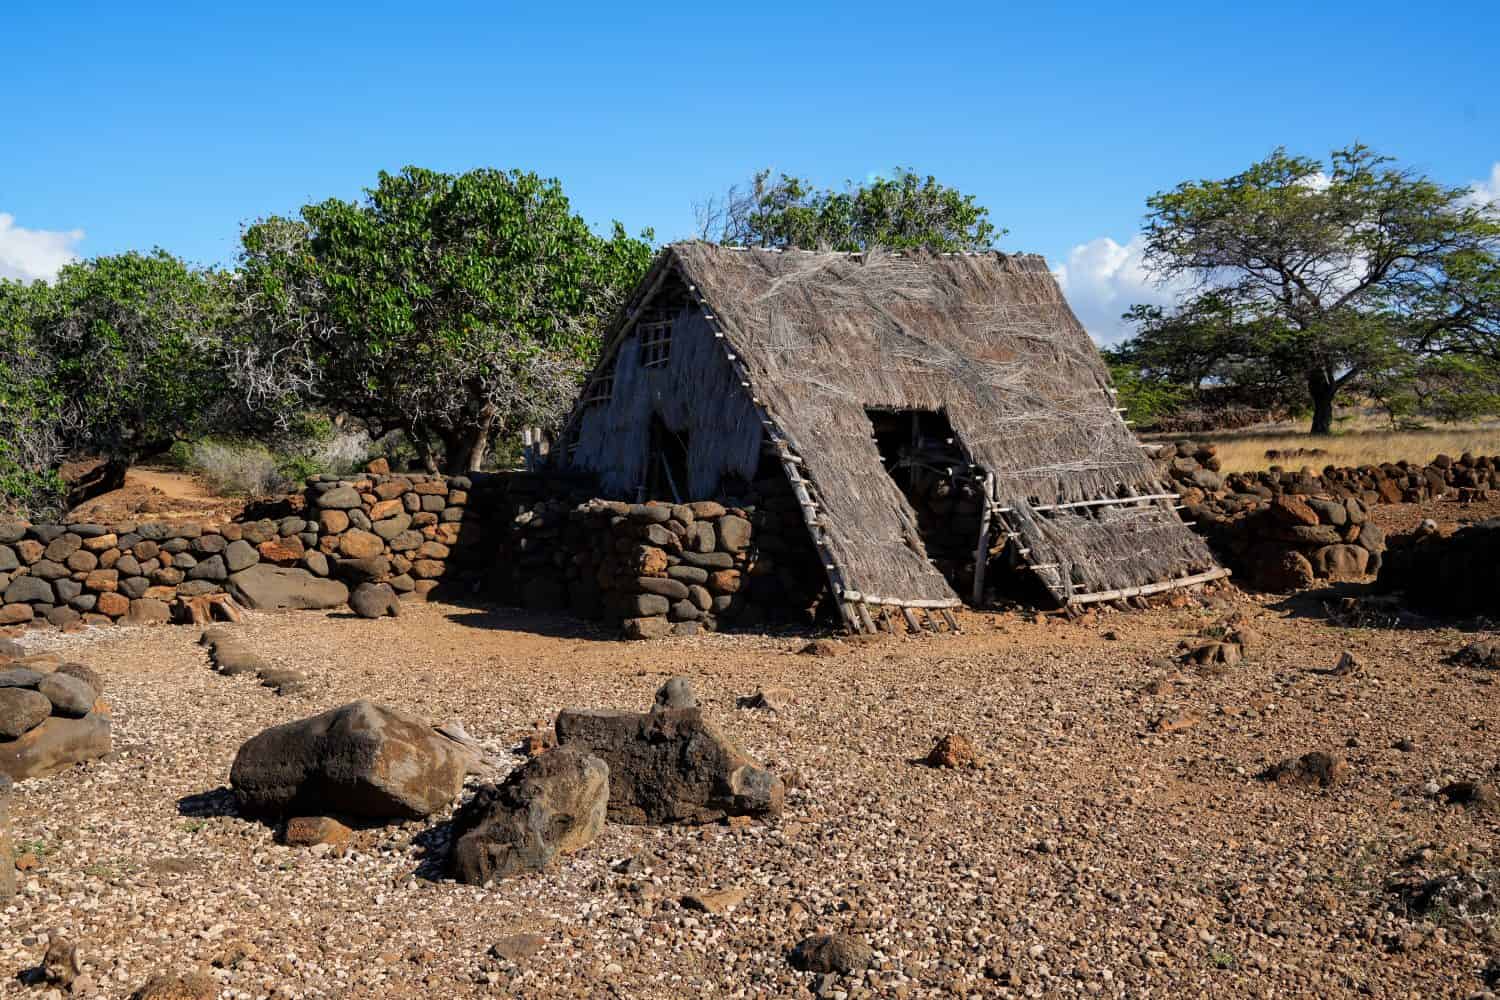 Rebuilt Hawaiian Hale in the ancient fishing village in ruins of the Lapakahi State Historical Park on the island of Hawai'i (Big Island) in the United States - Traditional Polynesian house